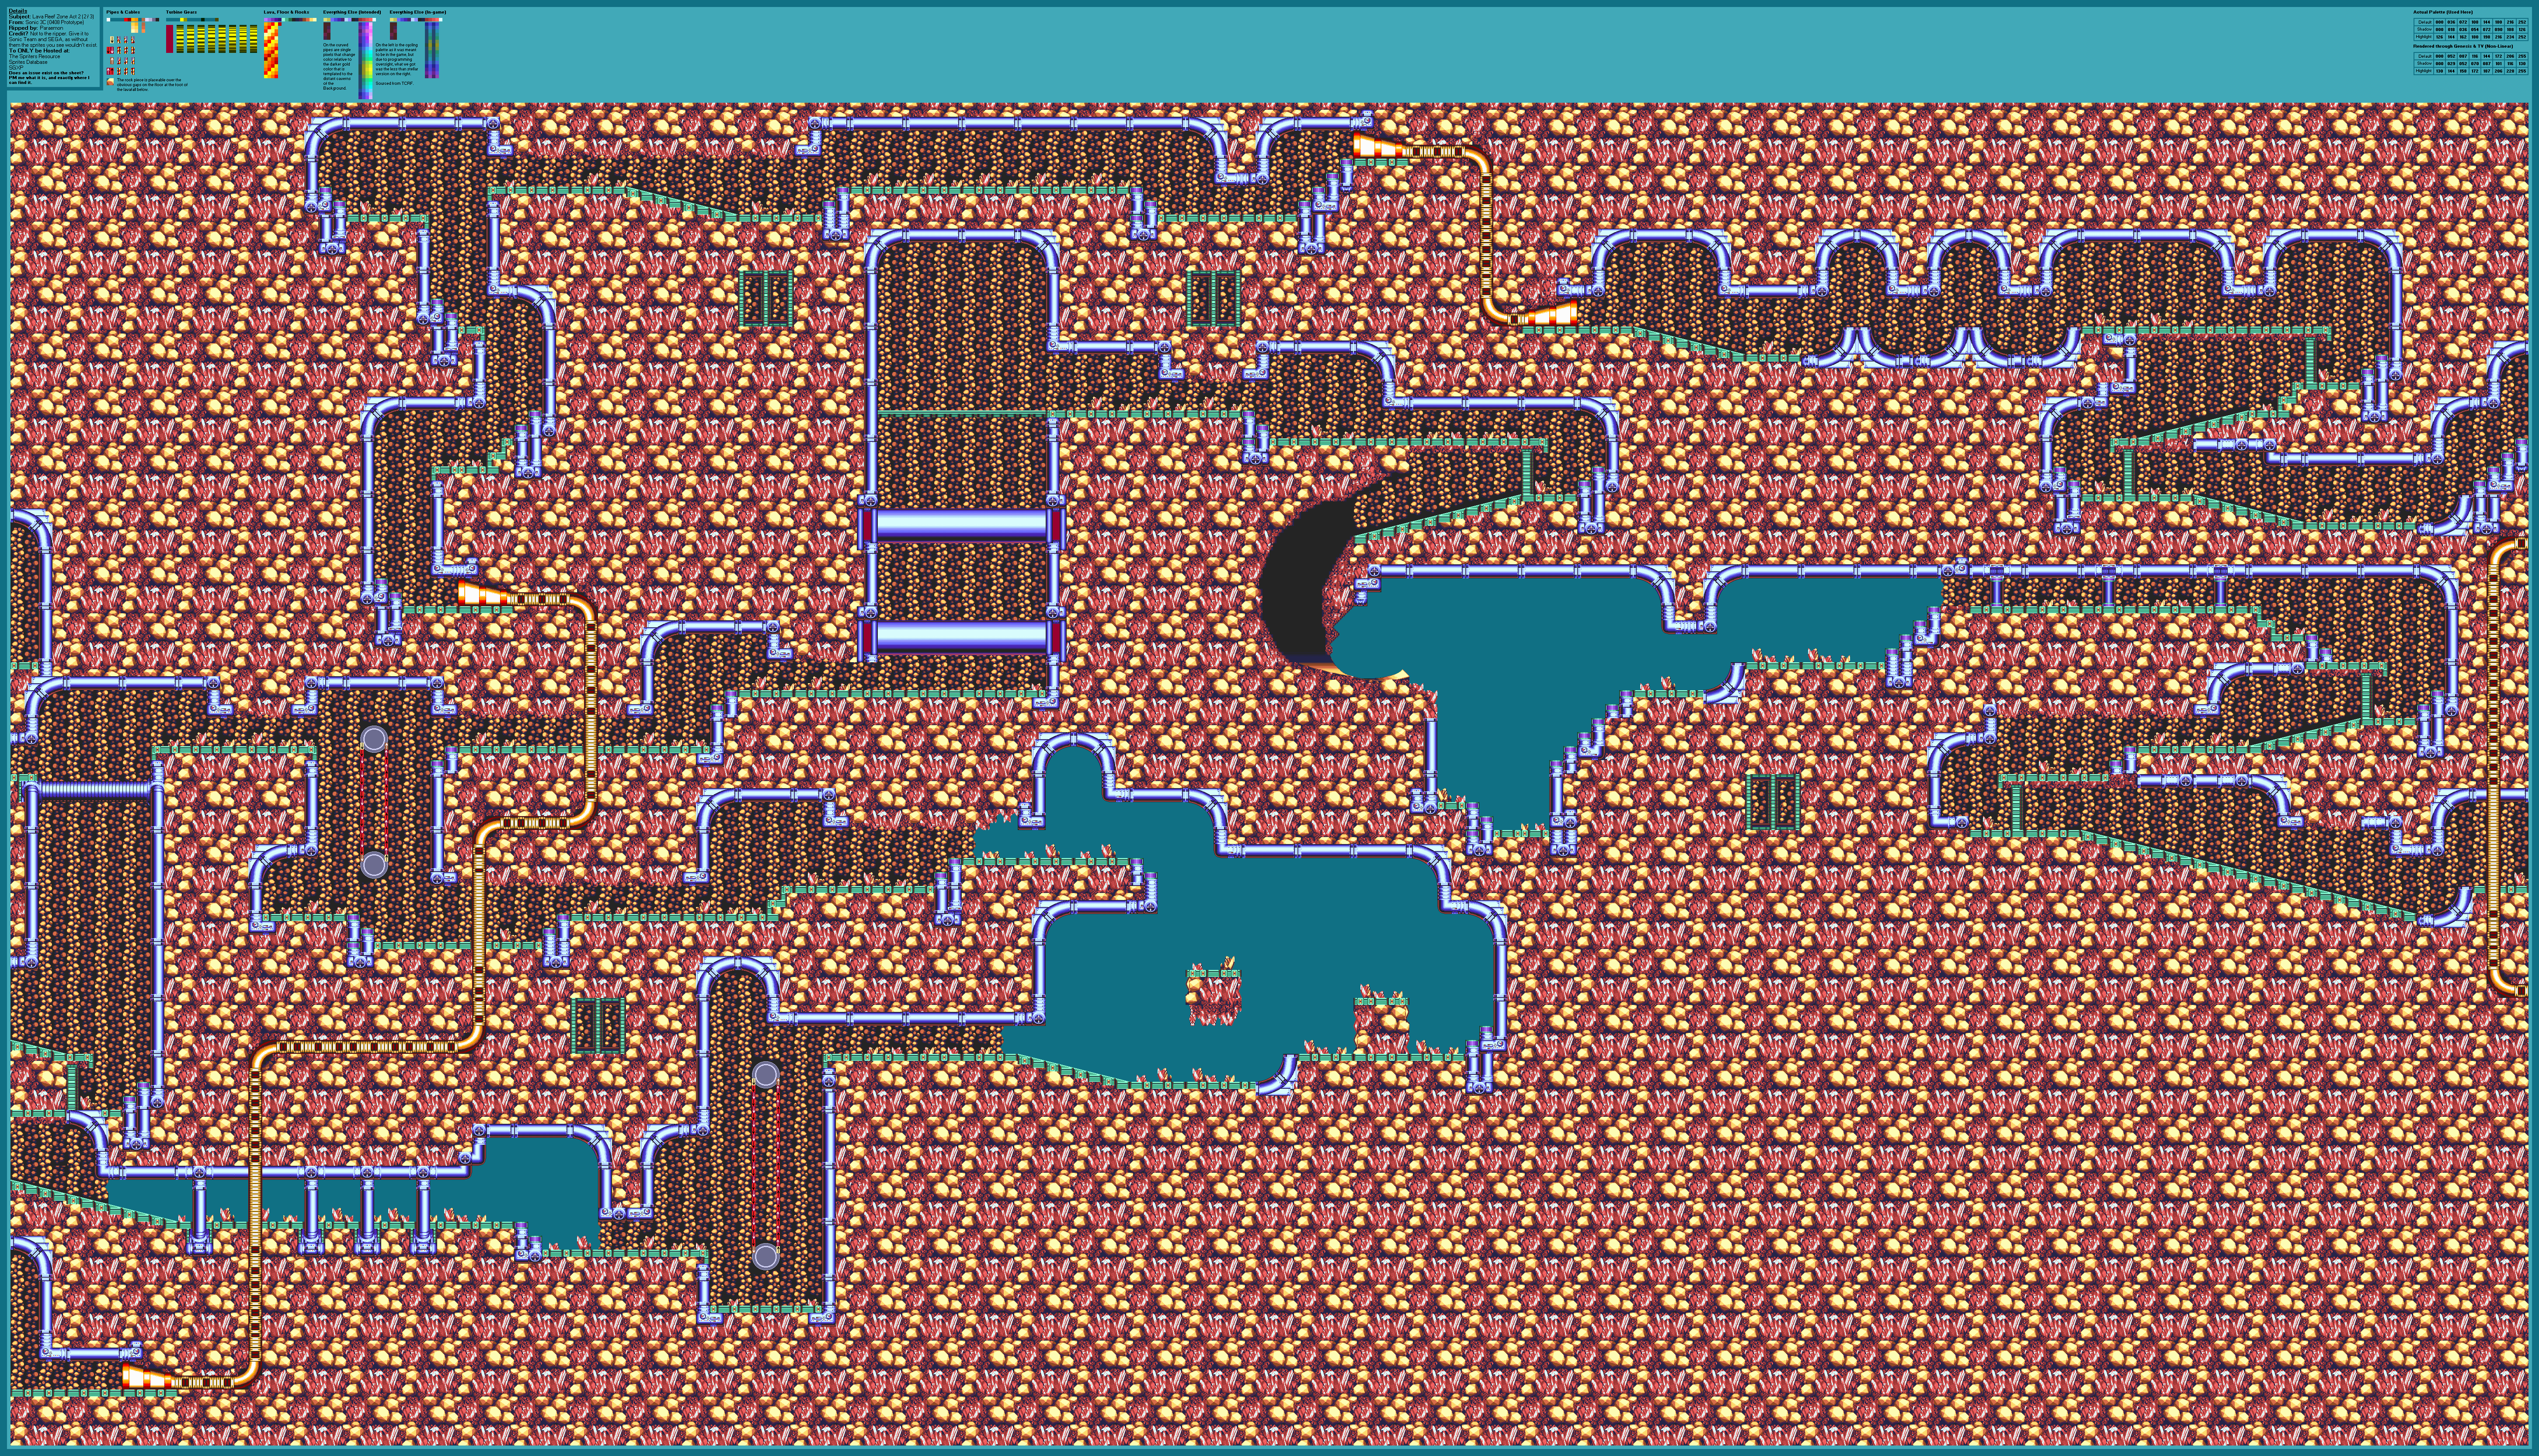 Sonic & Knuckles - Lava Reef Zone Act 2 (Prototype Palette, 2/3)